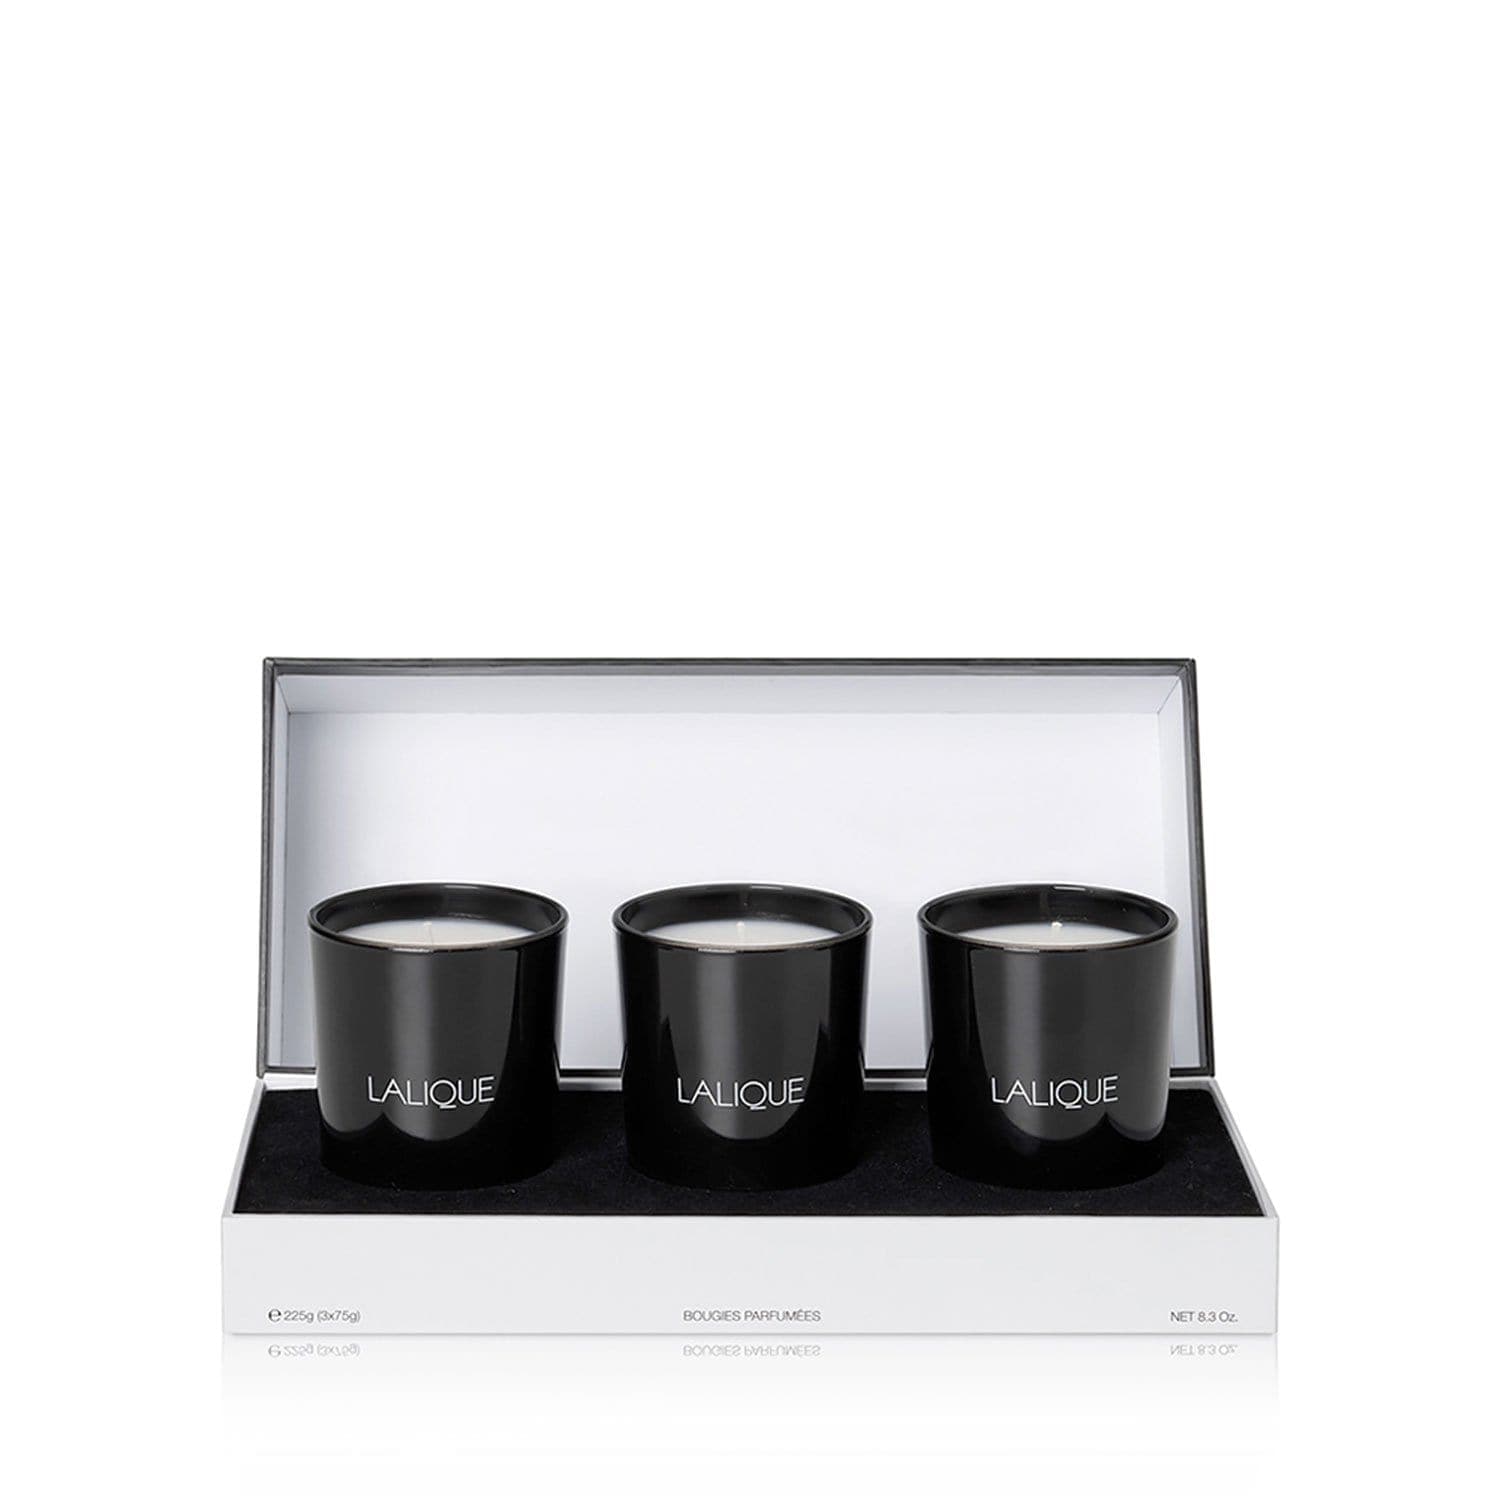 LALIQUE ORIENTAL TREASURES, 3PC SCENTED CANDLES GIFT SET 75G - B20162